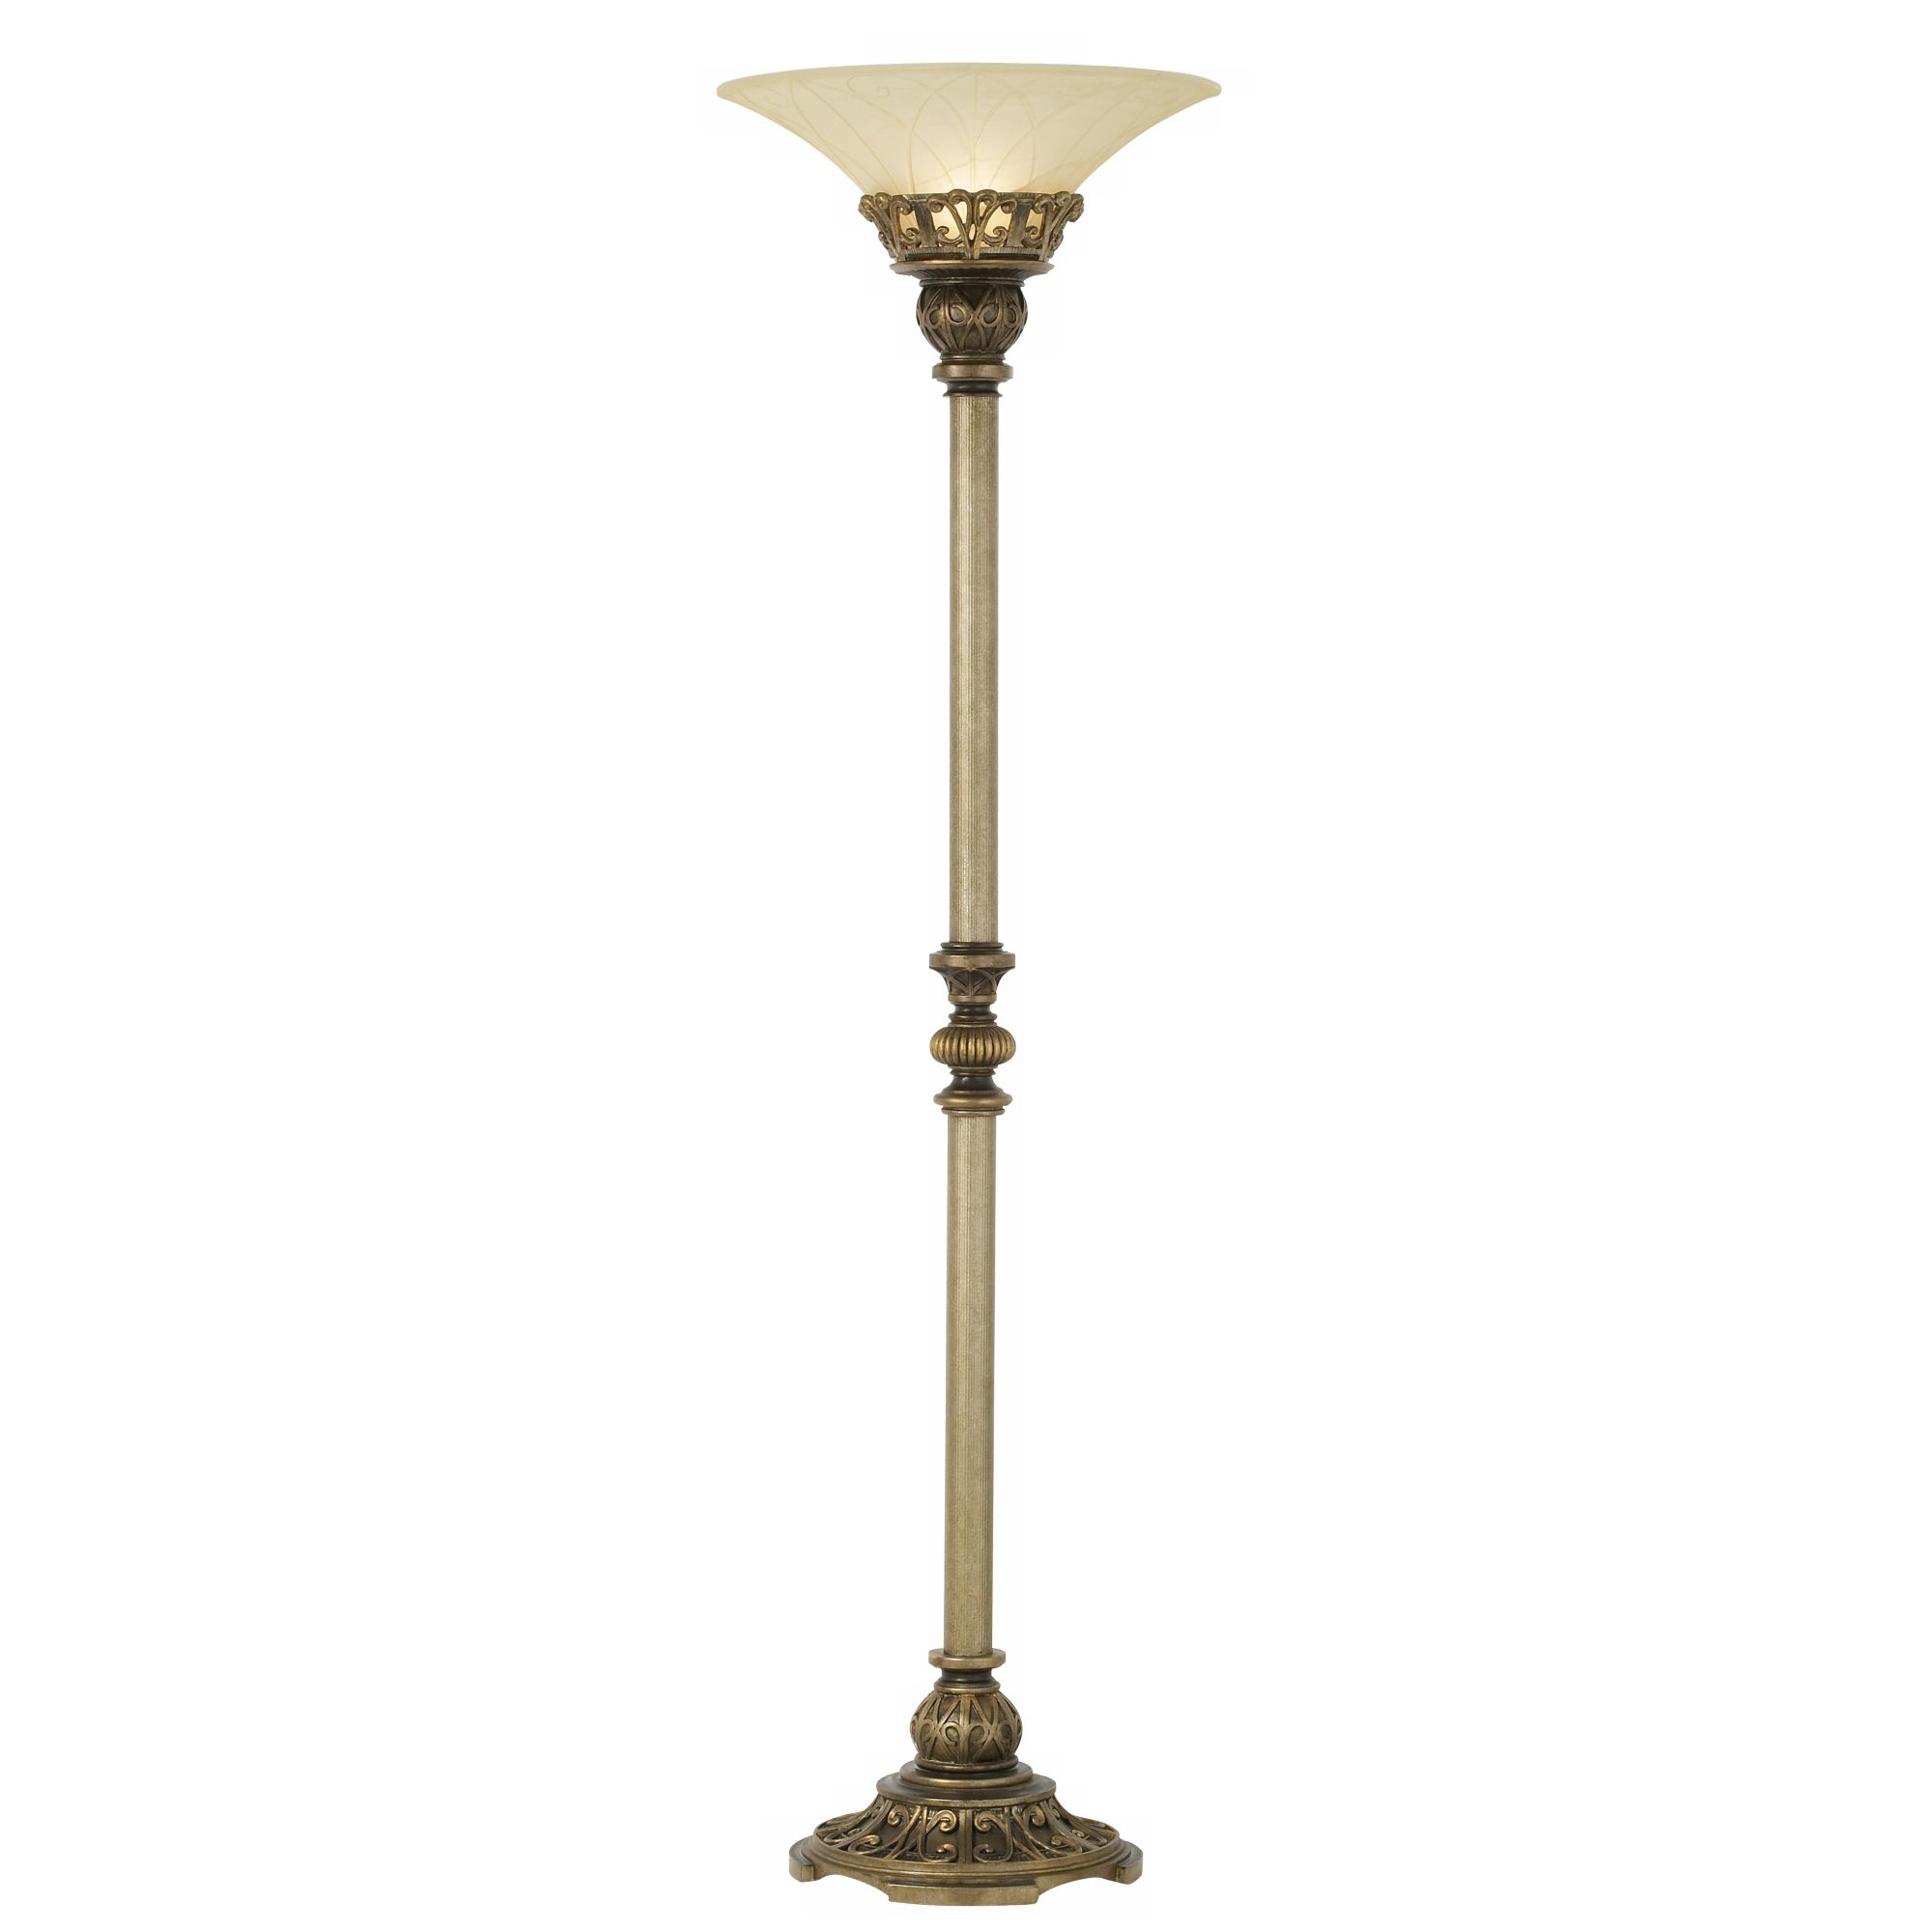 Pacific Coast Lighting Timeless Elegance Traditional Torchiere Floor Lamp